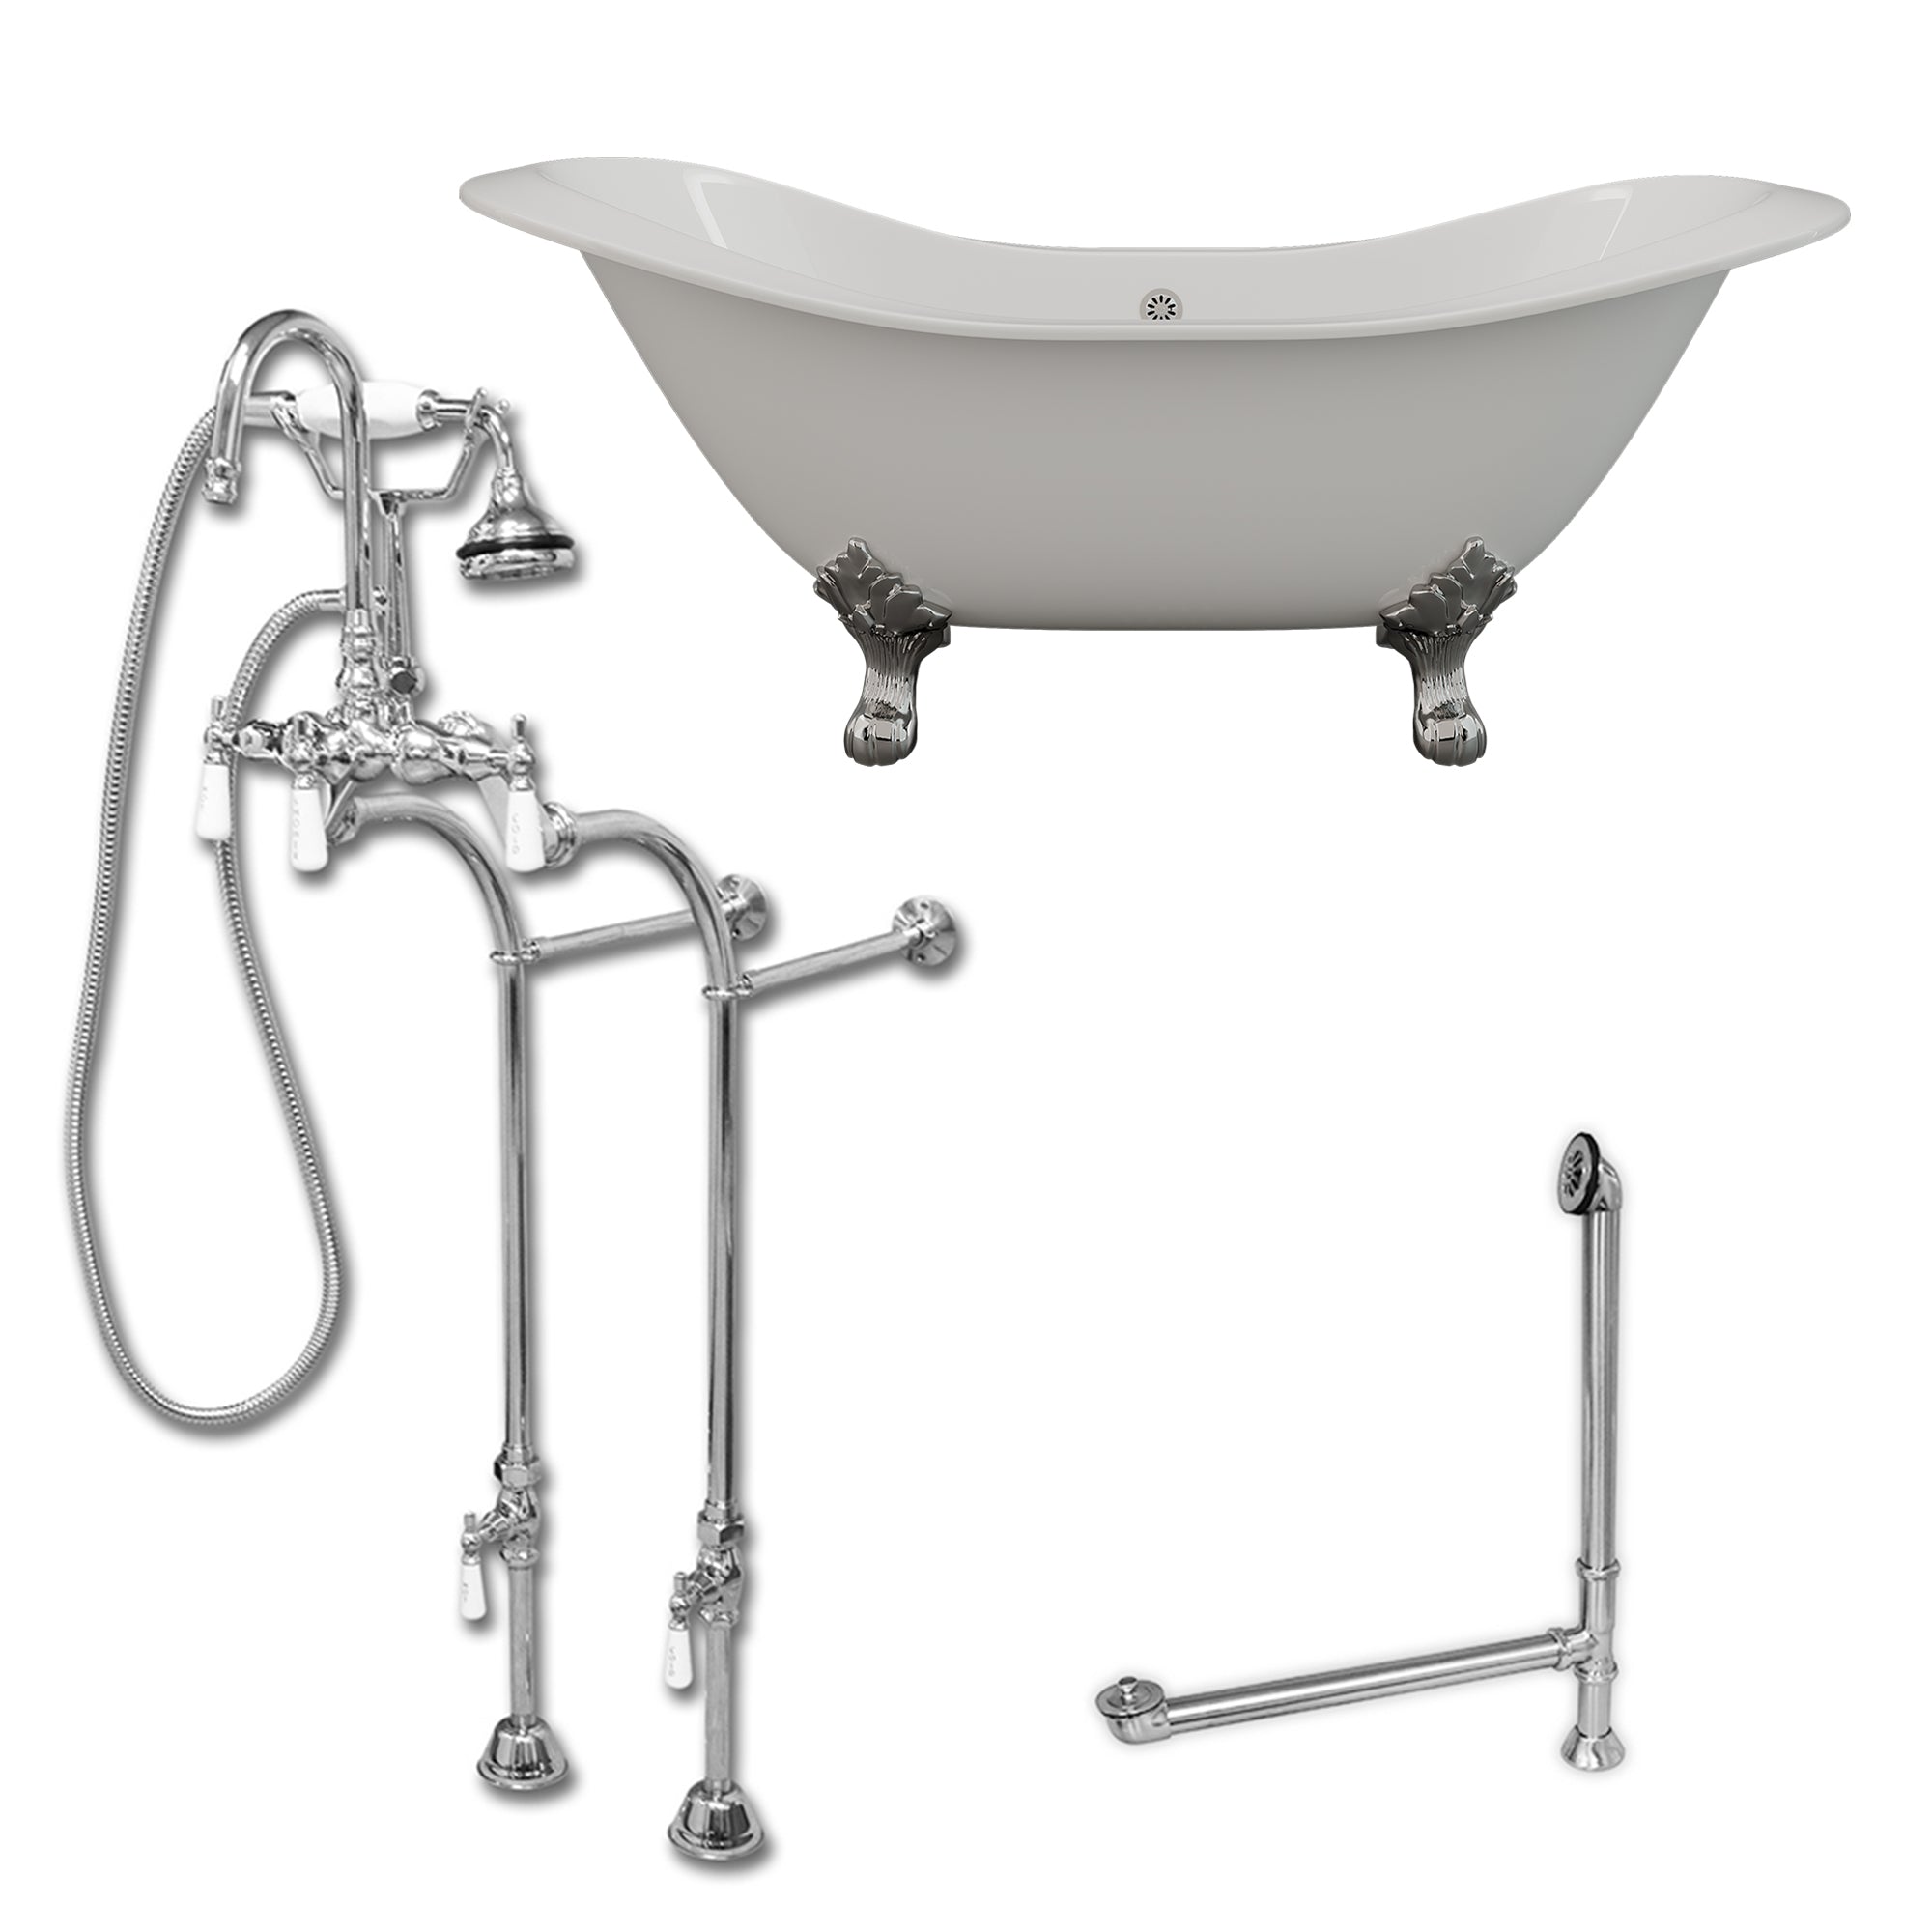 Cambridge Plumbing Double Slipper Cast Iron Soaking Tub (Porcelain interior and white paint exterior) with Lion’s Paw Feet and Free-standing Plumbing Package (Brushed nickel) DES-398684-PKG-NH - Vital Hydrotherapy